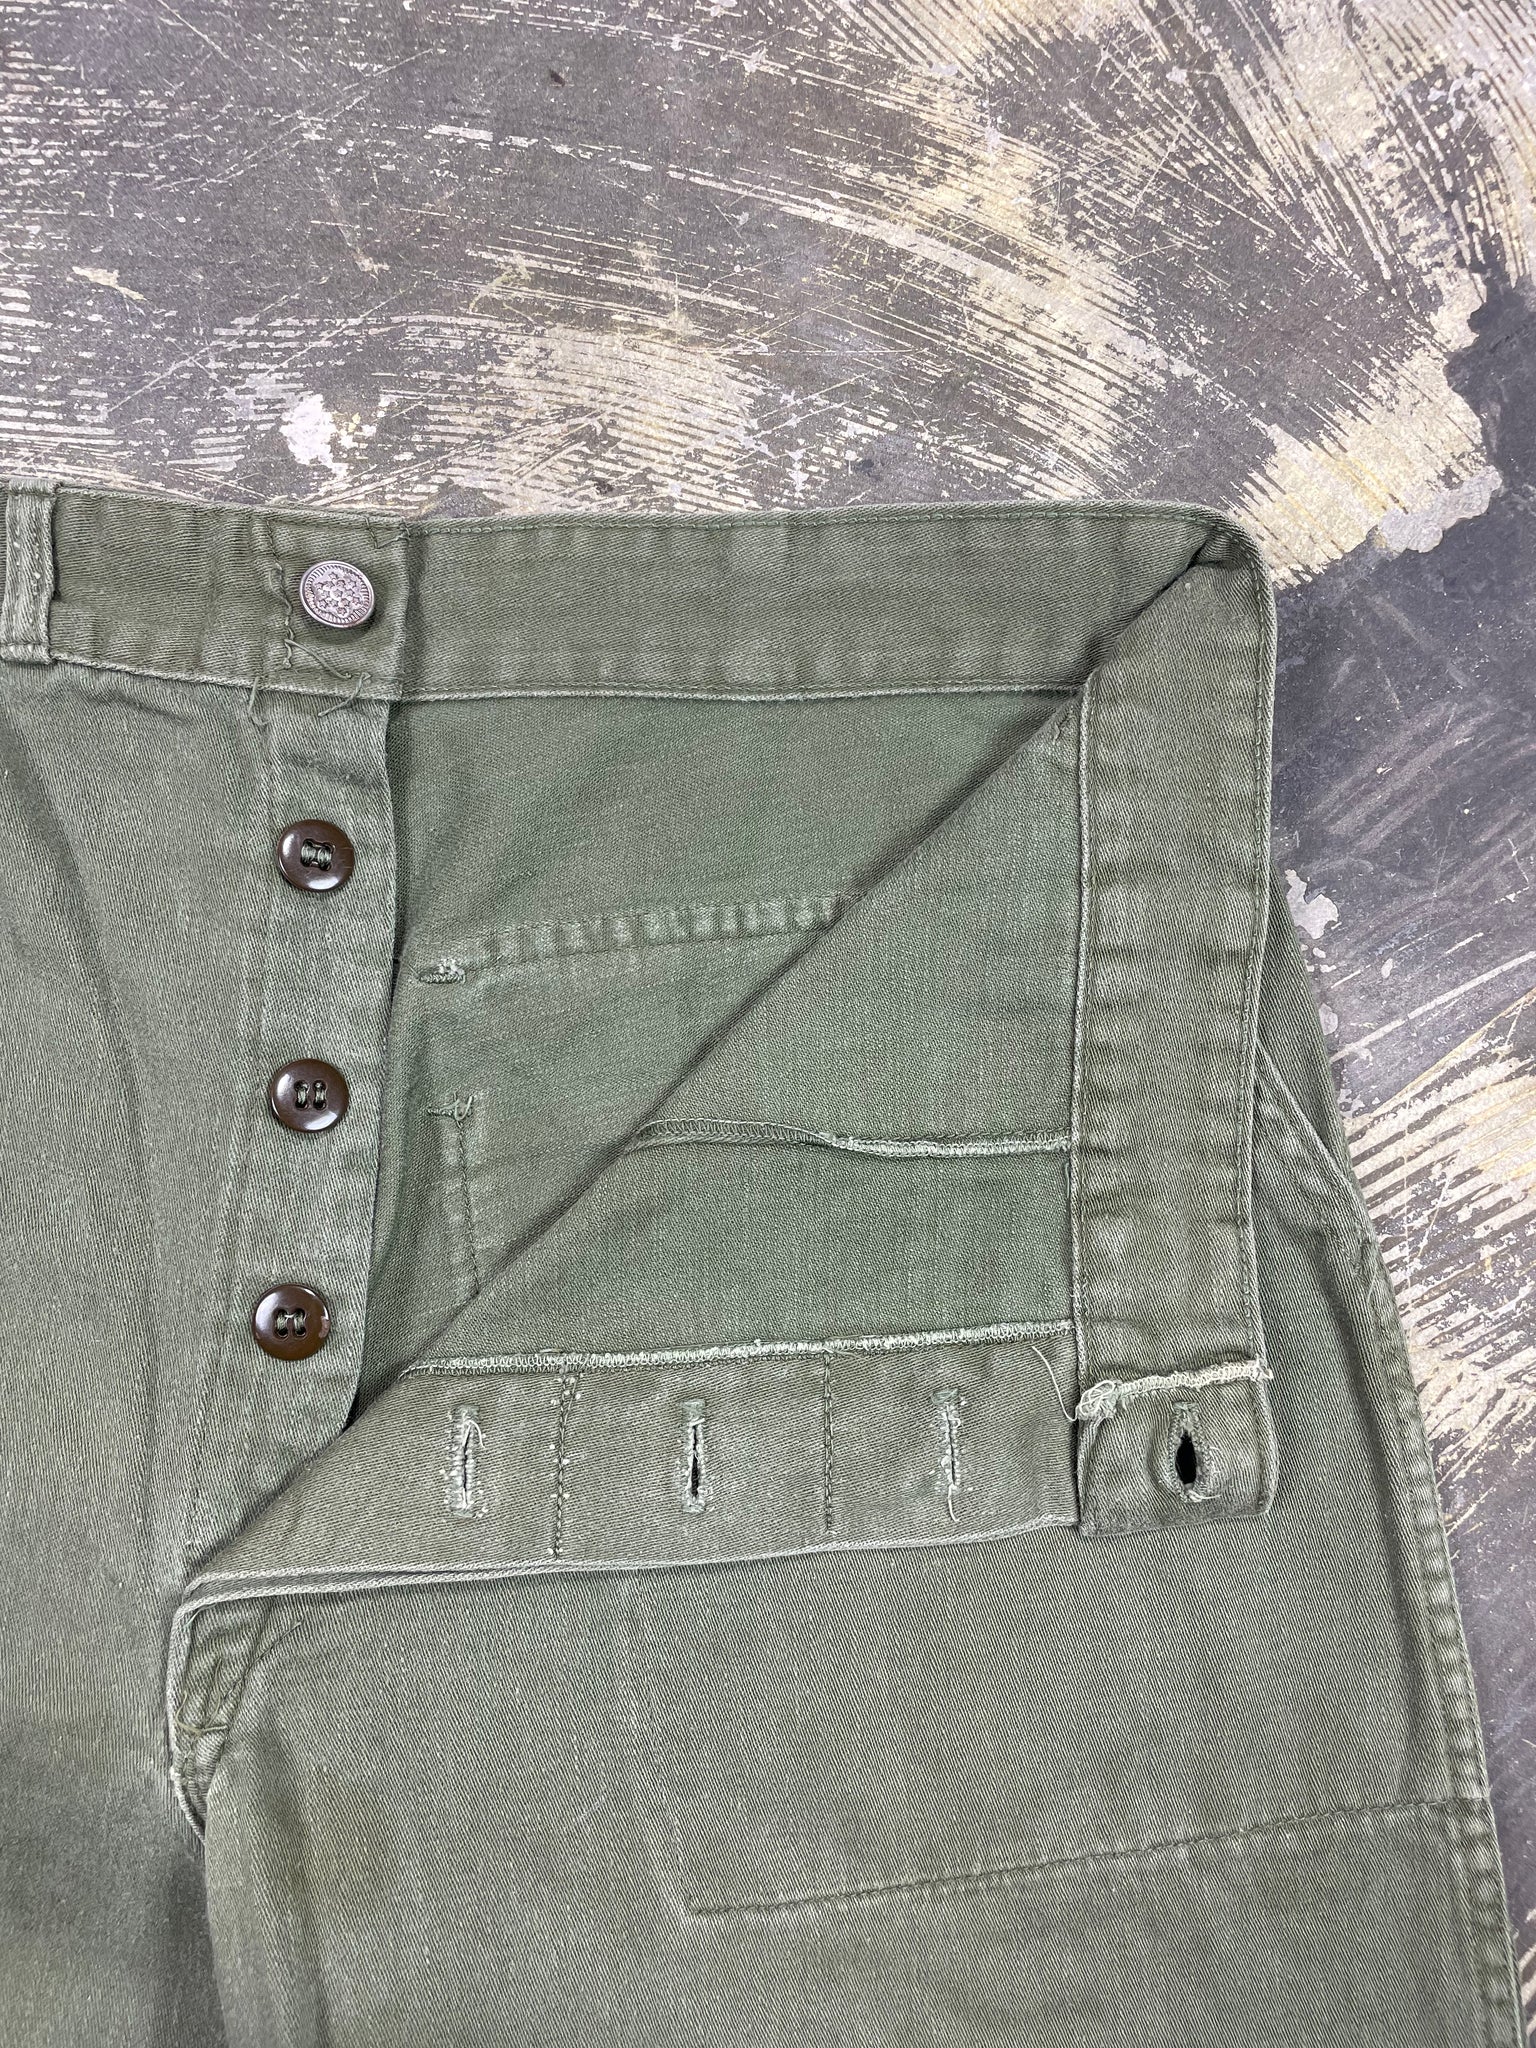 1950's US Military 13-Star Button Utility Pants (JYJ-0191)